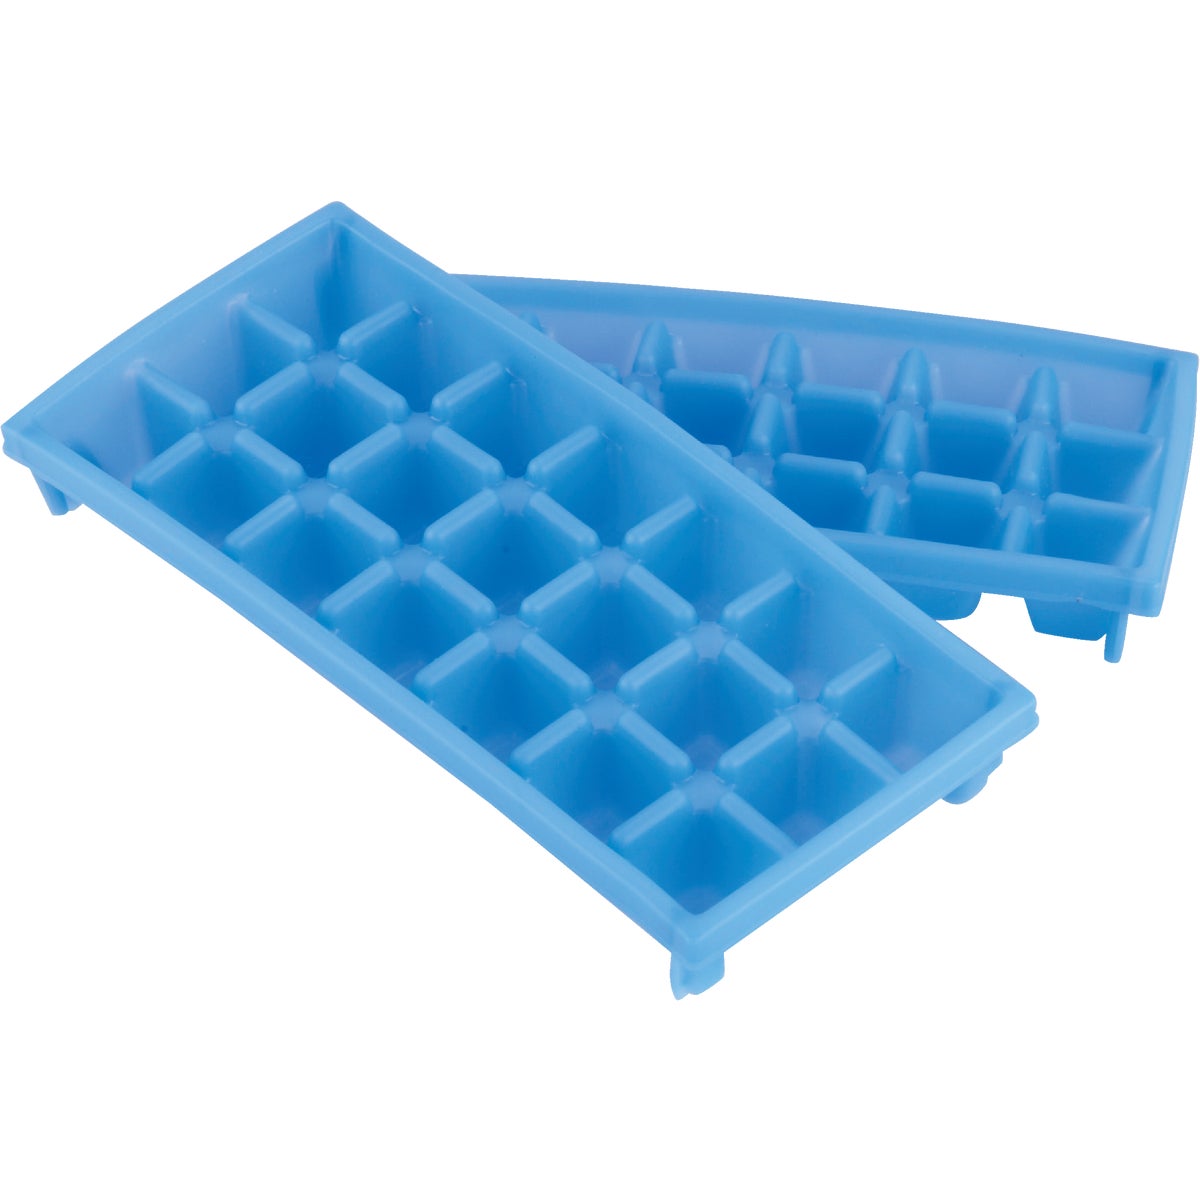 Item 578976, Small trays fit perfectly into RV, marine, or dorm freezers. Set of 2.